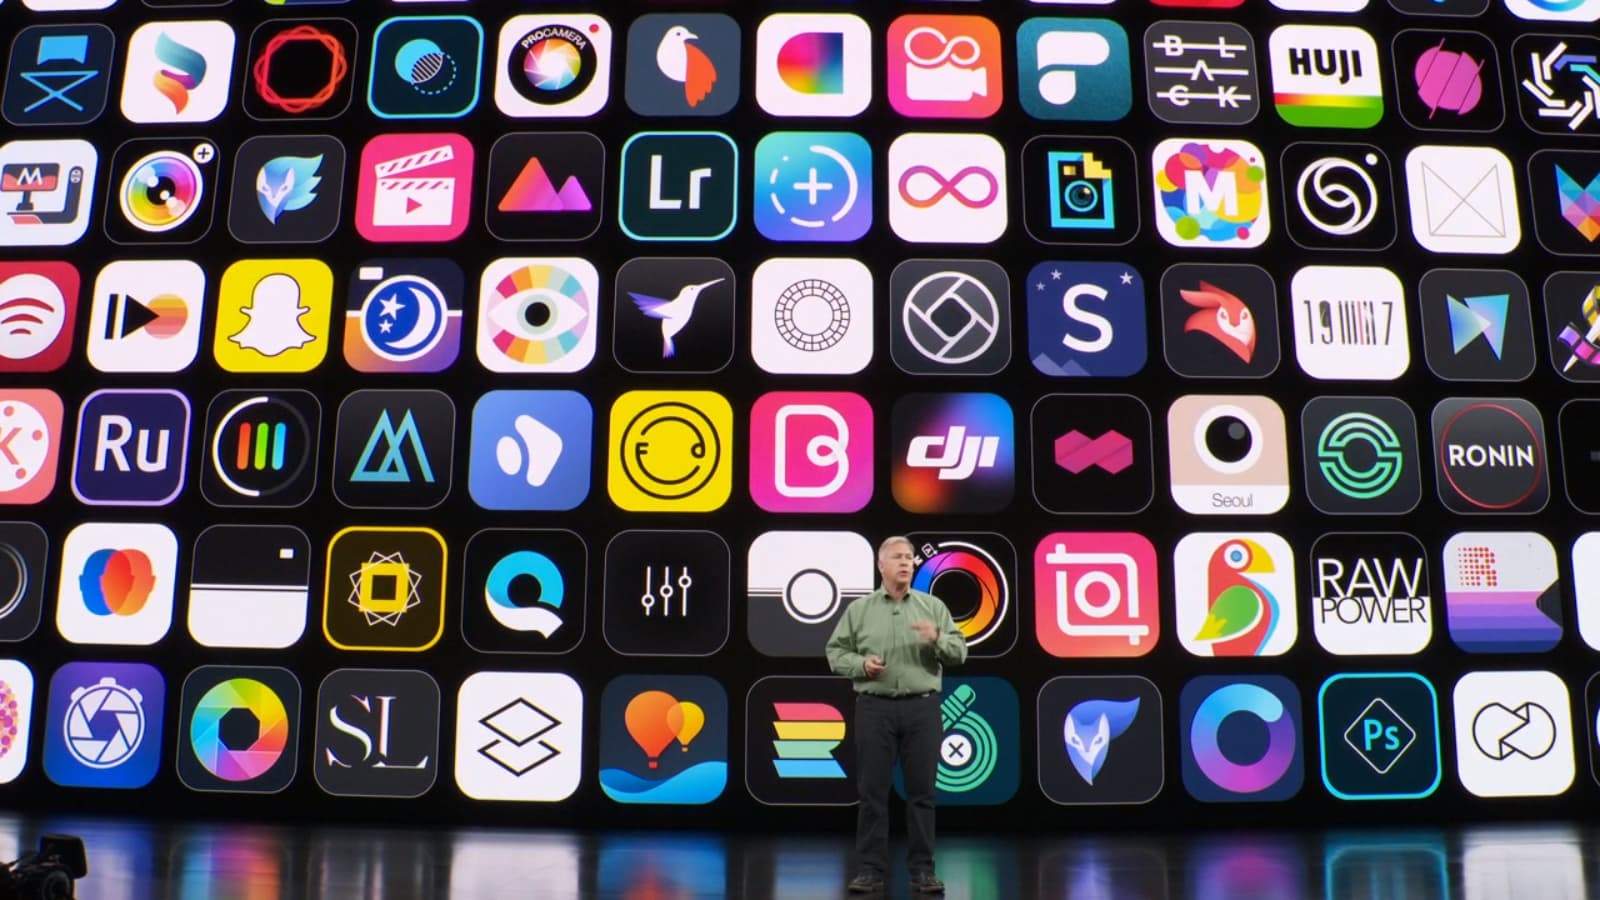 Best iPhone, iPad apps of 2019, according to Apple